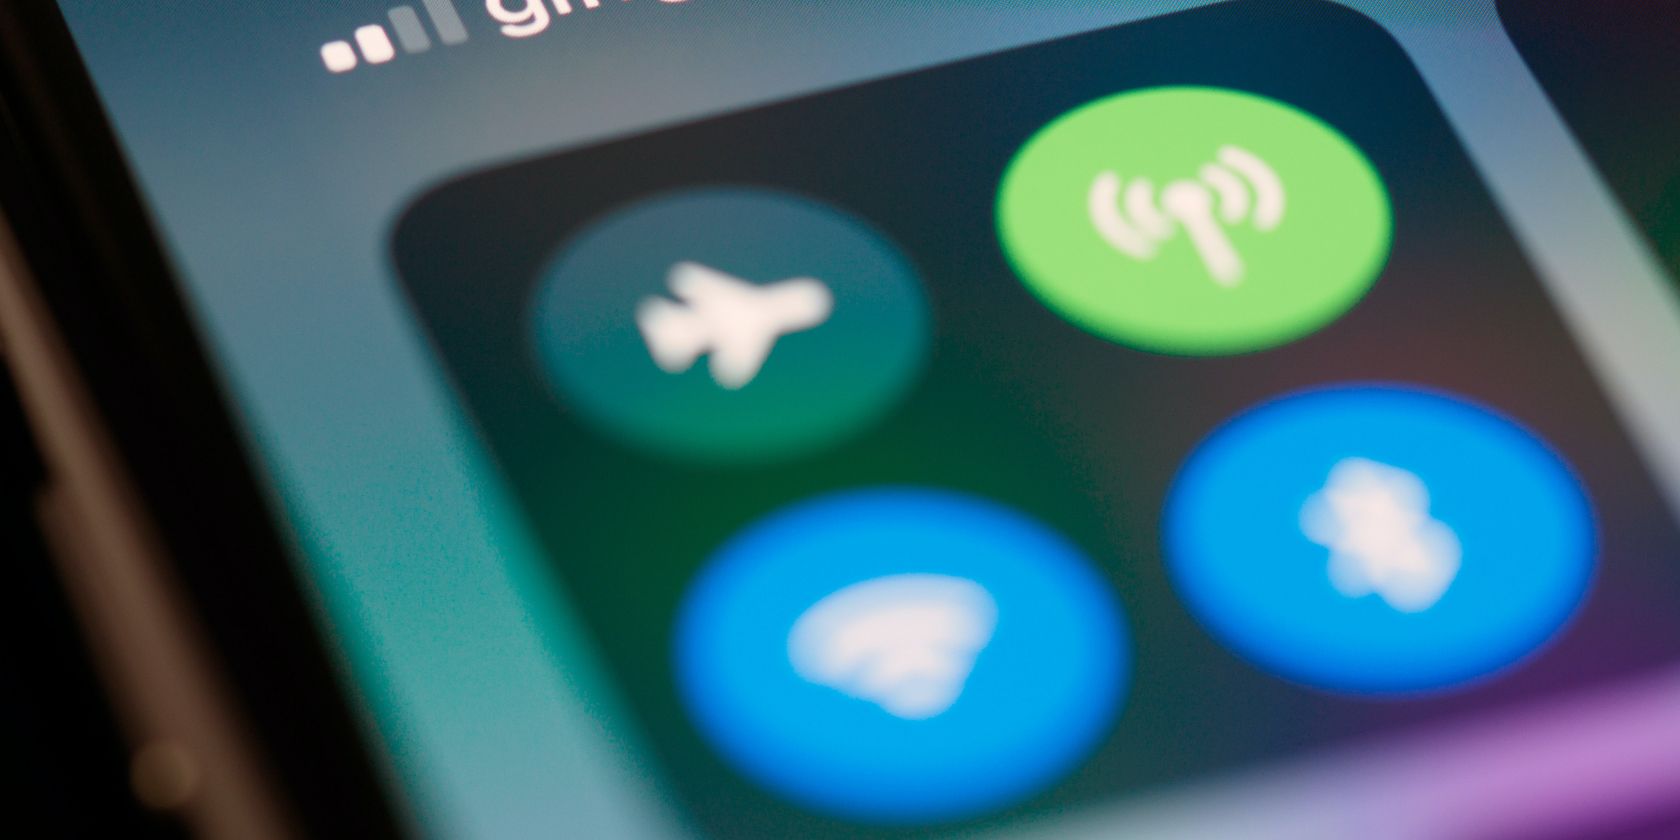 Close-up of the WiFi and network toggles in the iPhone control center.